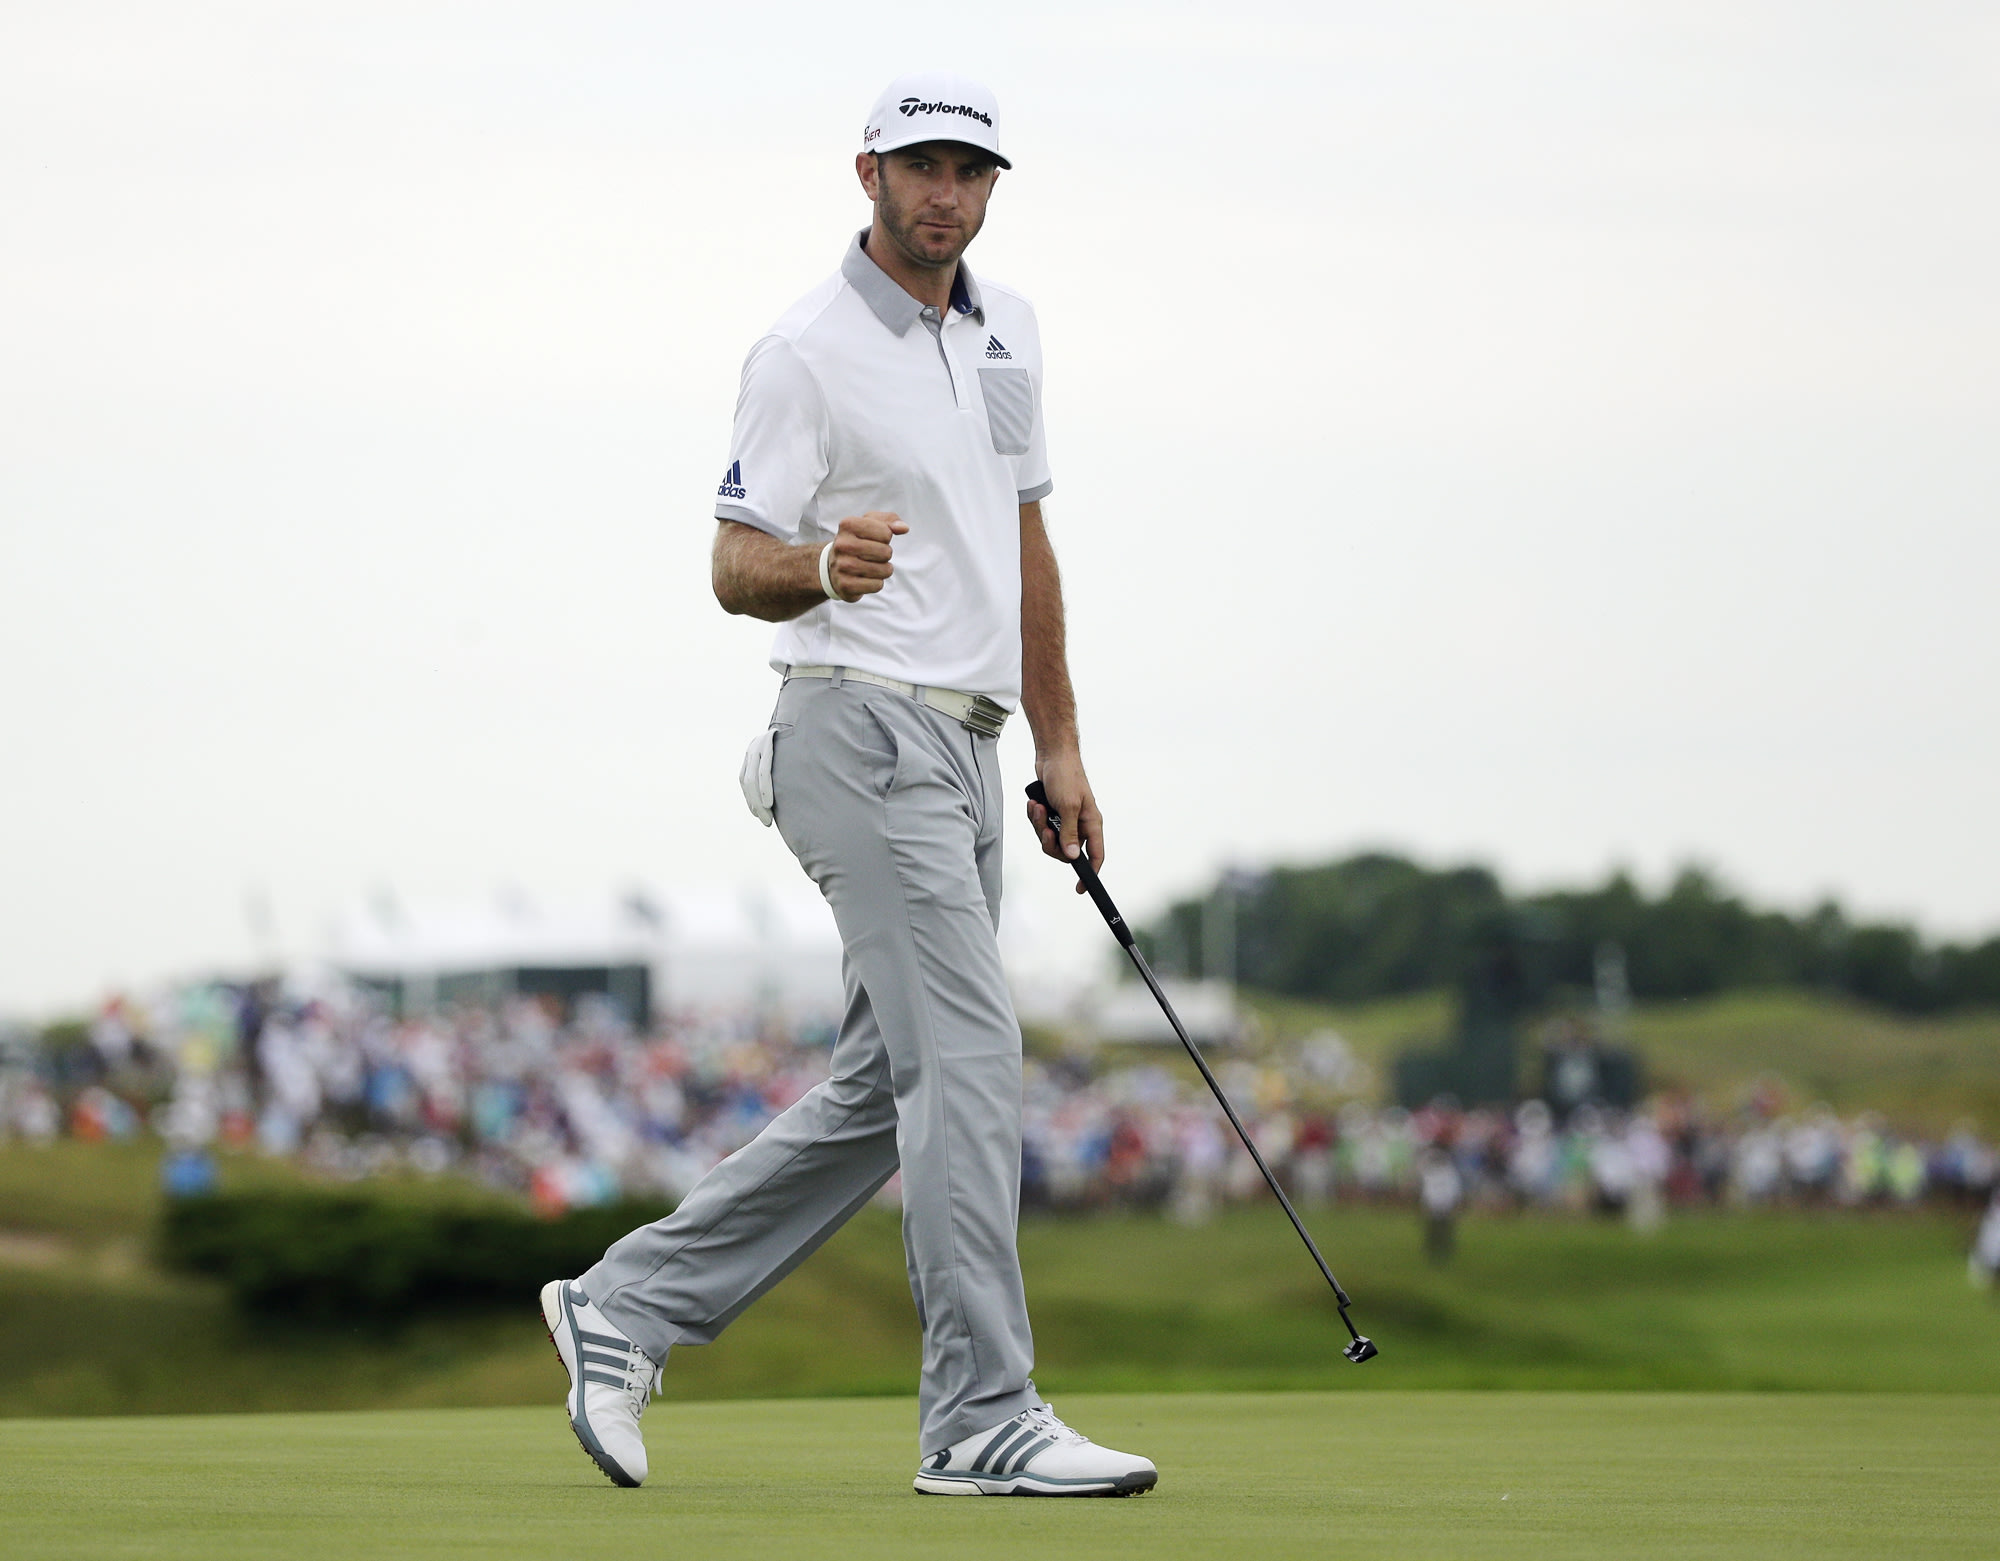 Dustin Johnson reacts after making an eagle putt on the 16th hole. (AP)